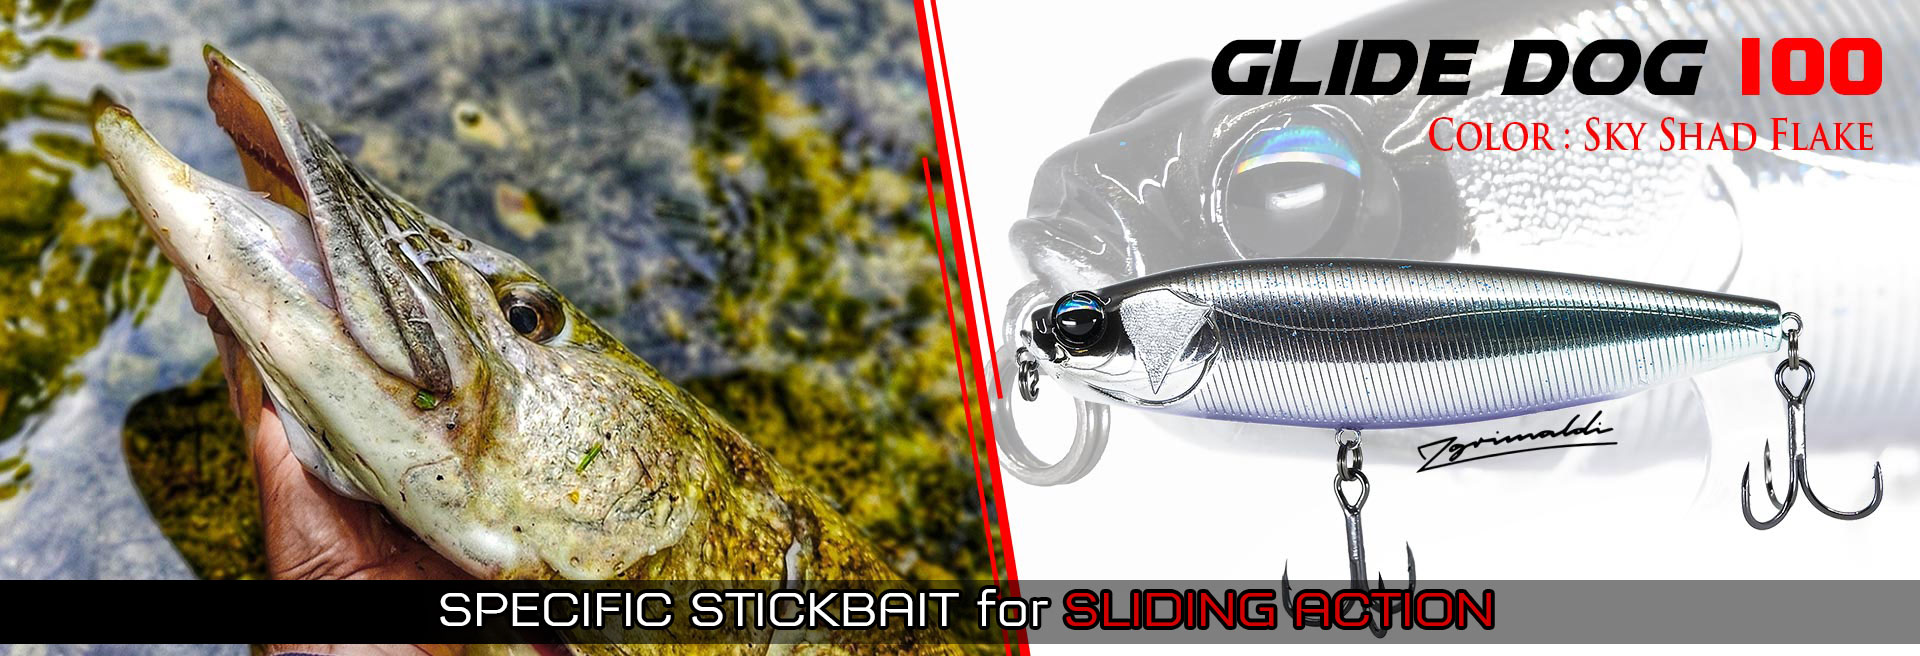 Floating stickbait lure GLIDE DOG 100 SKY SHAD FLAKE pike on the surface